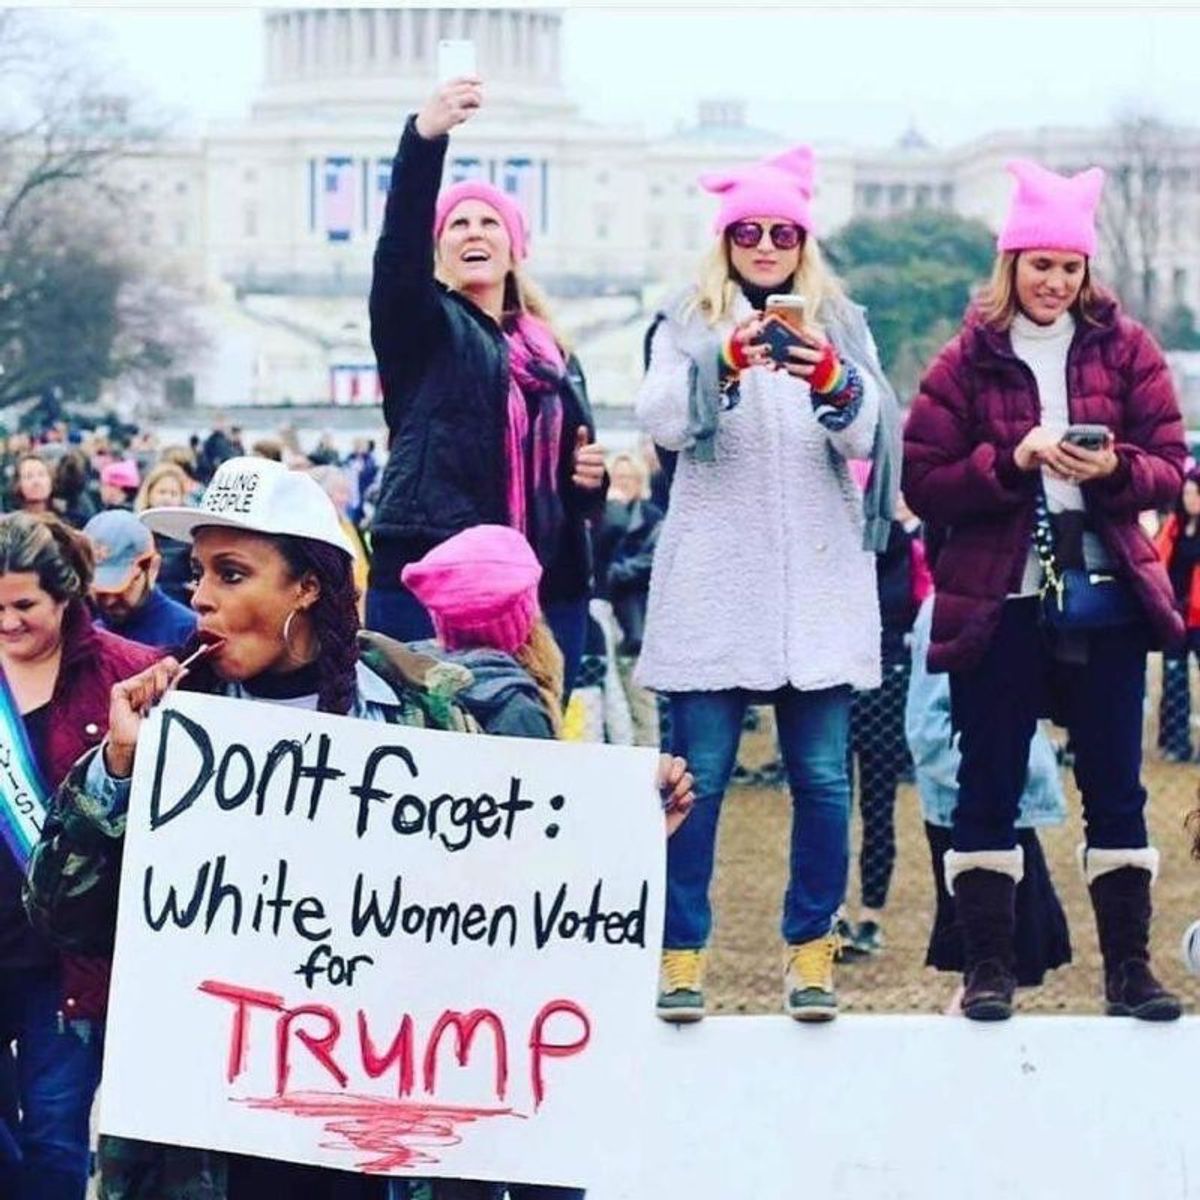 A Narrative Of The Women's March From A Non-White Woman